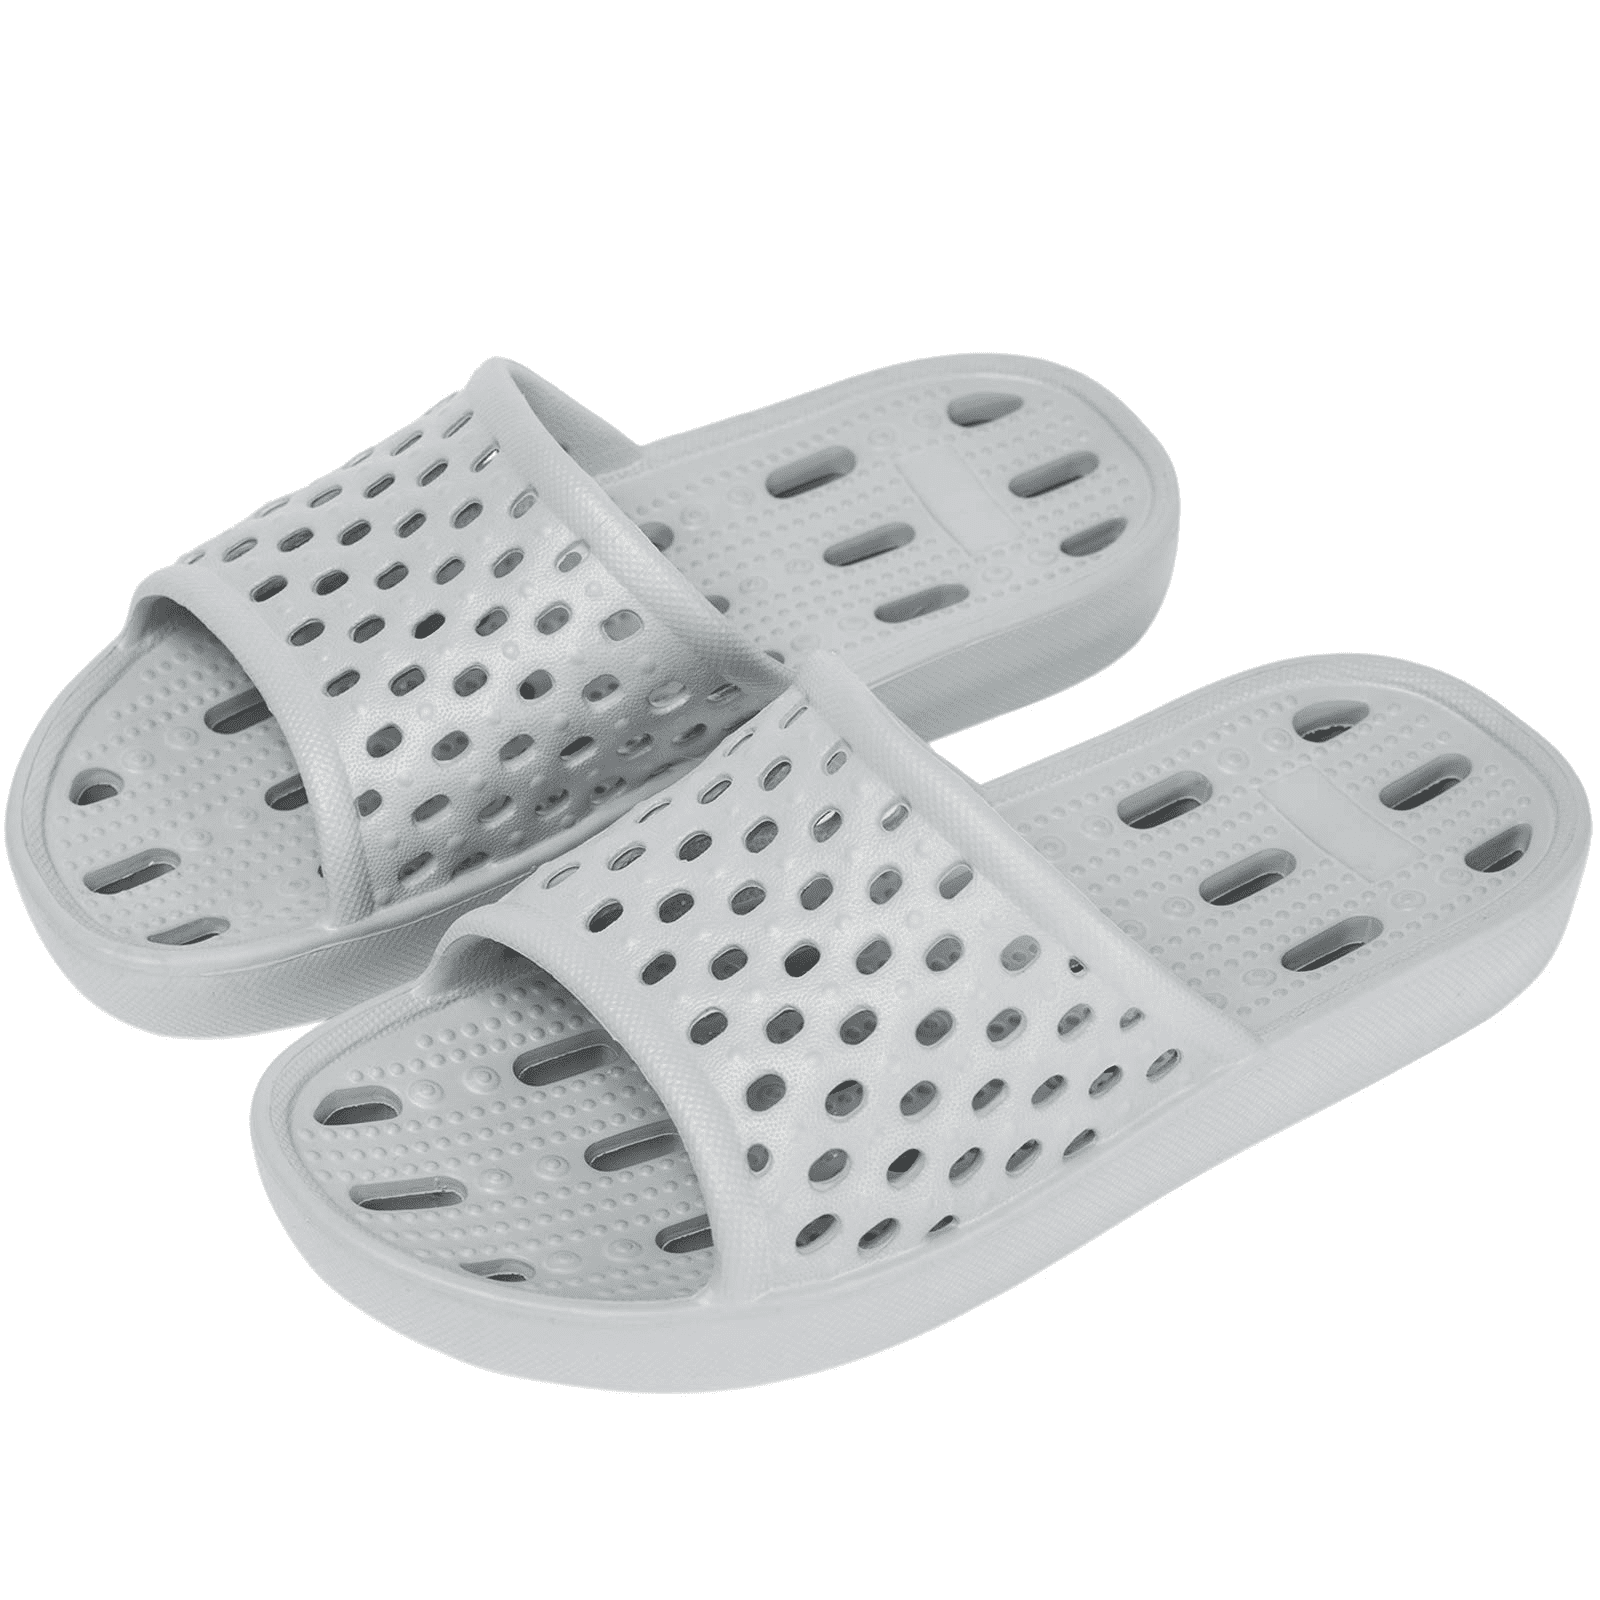 HomeTop Unisex Ultra Light EVA Neutral Colour Poolside Sandals for Beach and Shower with Anti-skid Sole 